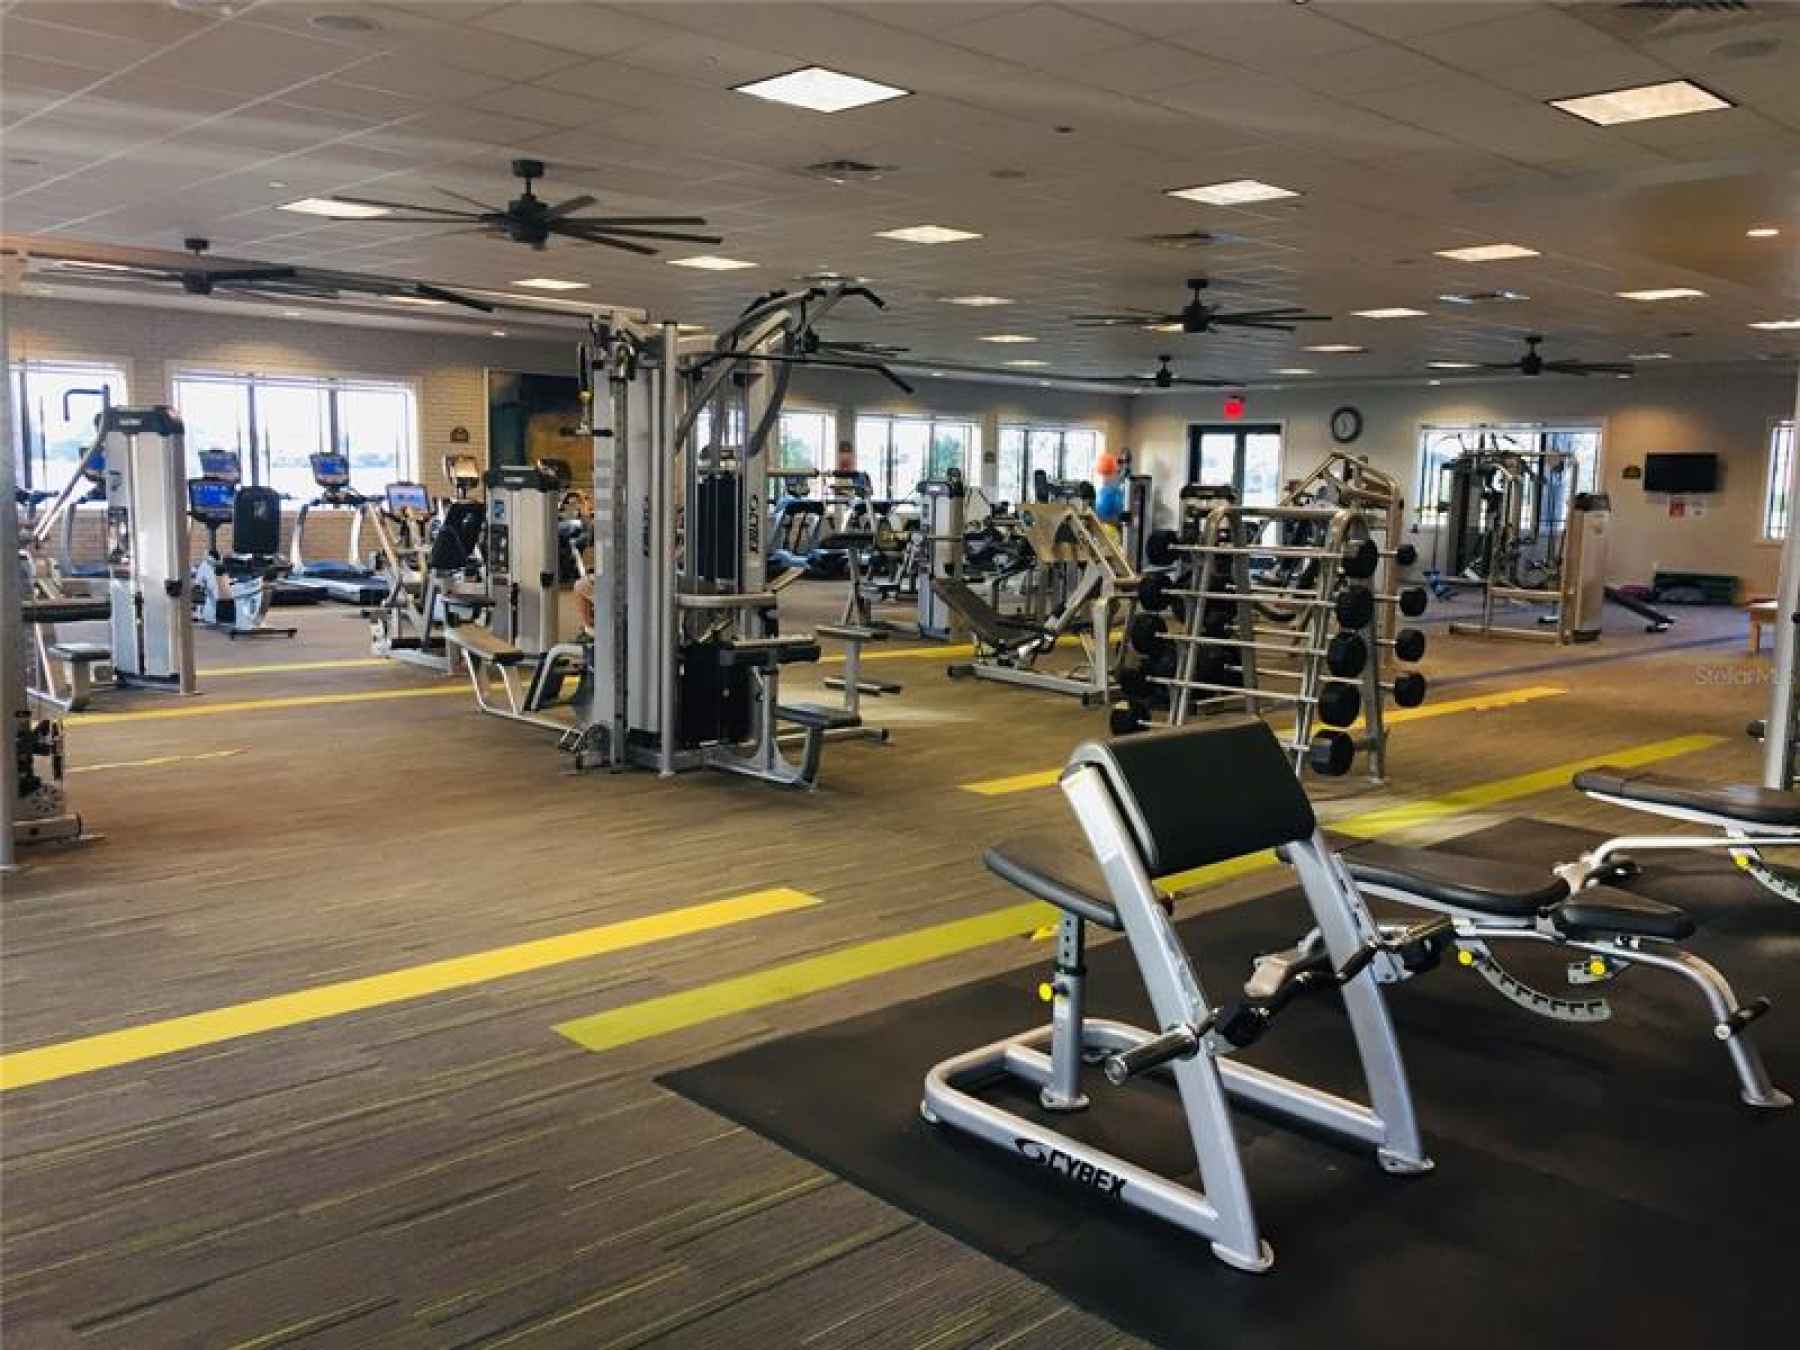 ENJOY THE STATE-OF-THE-ART FITNESS FACILITY. MANY CLASSES OFFERED TOO!